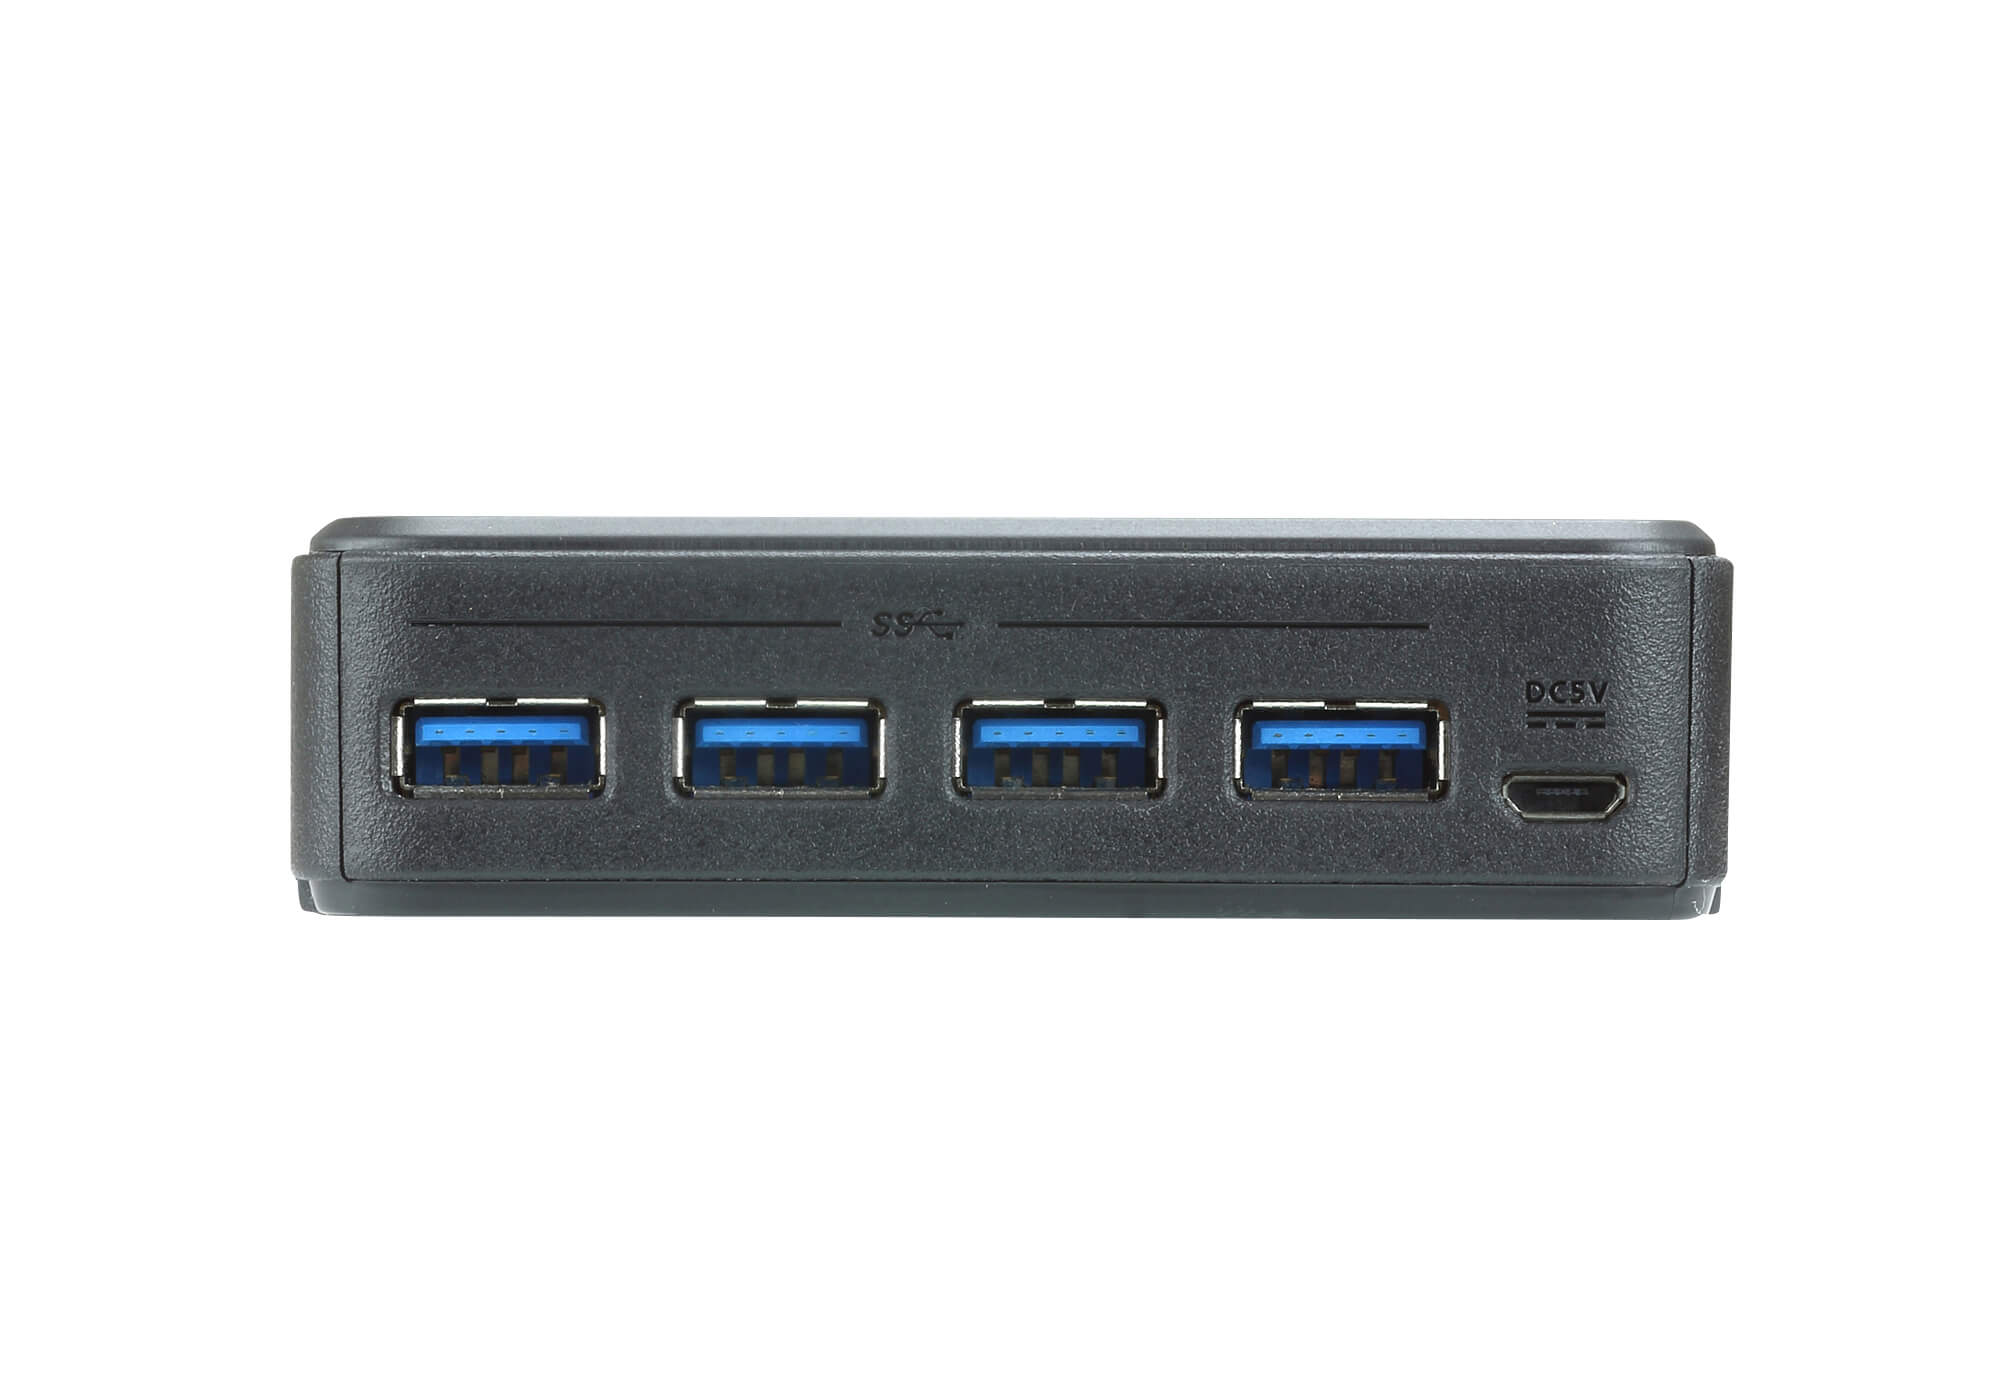 Aten Peripheral Switch 4×4 USB 3.1 Gen1, 4x PC, 4x USB 3.1 Gen1 Ports, Remote Port Selector, Plug and Play